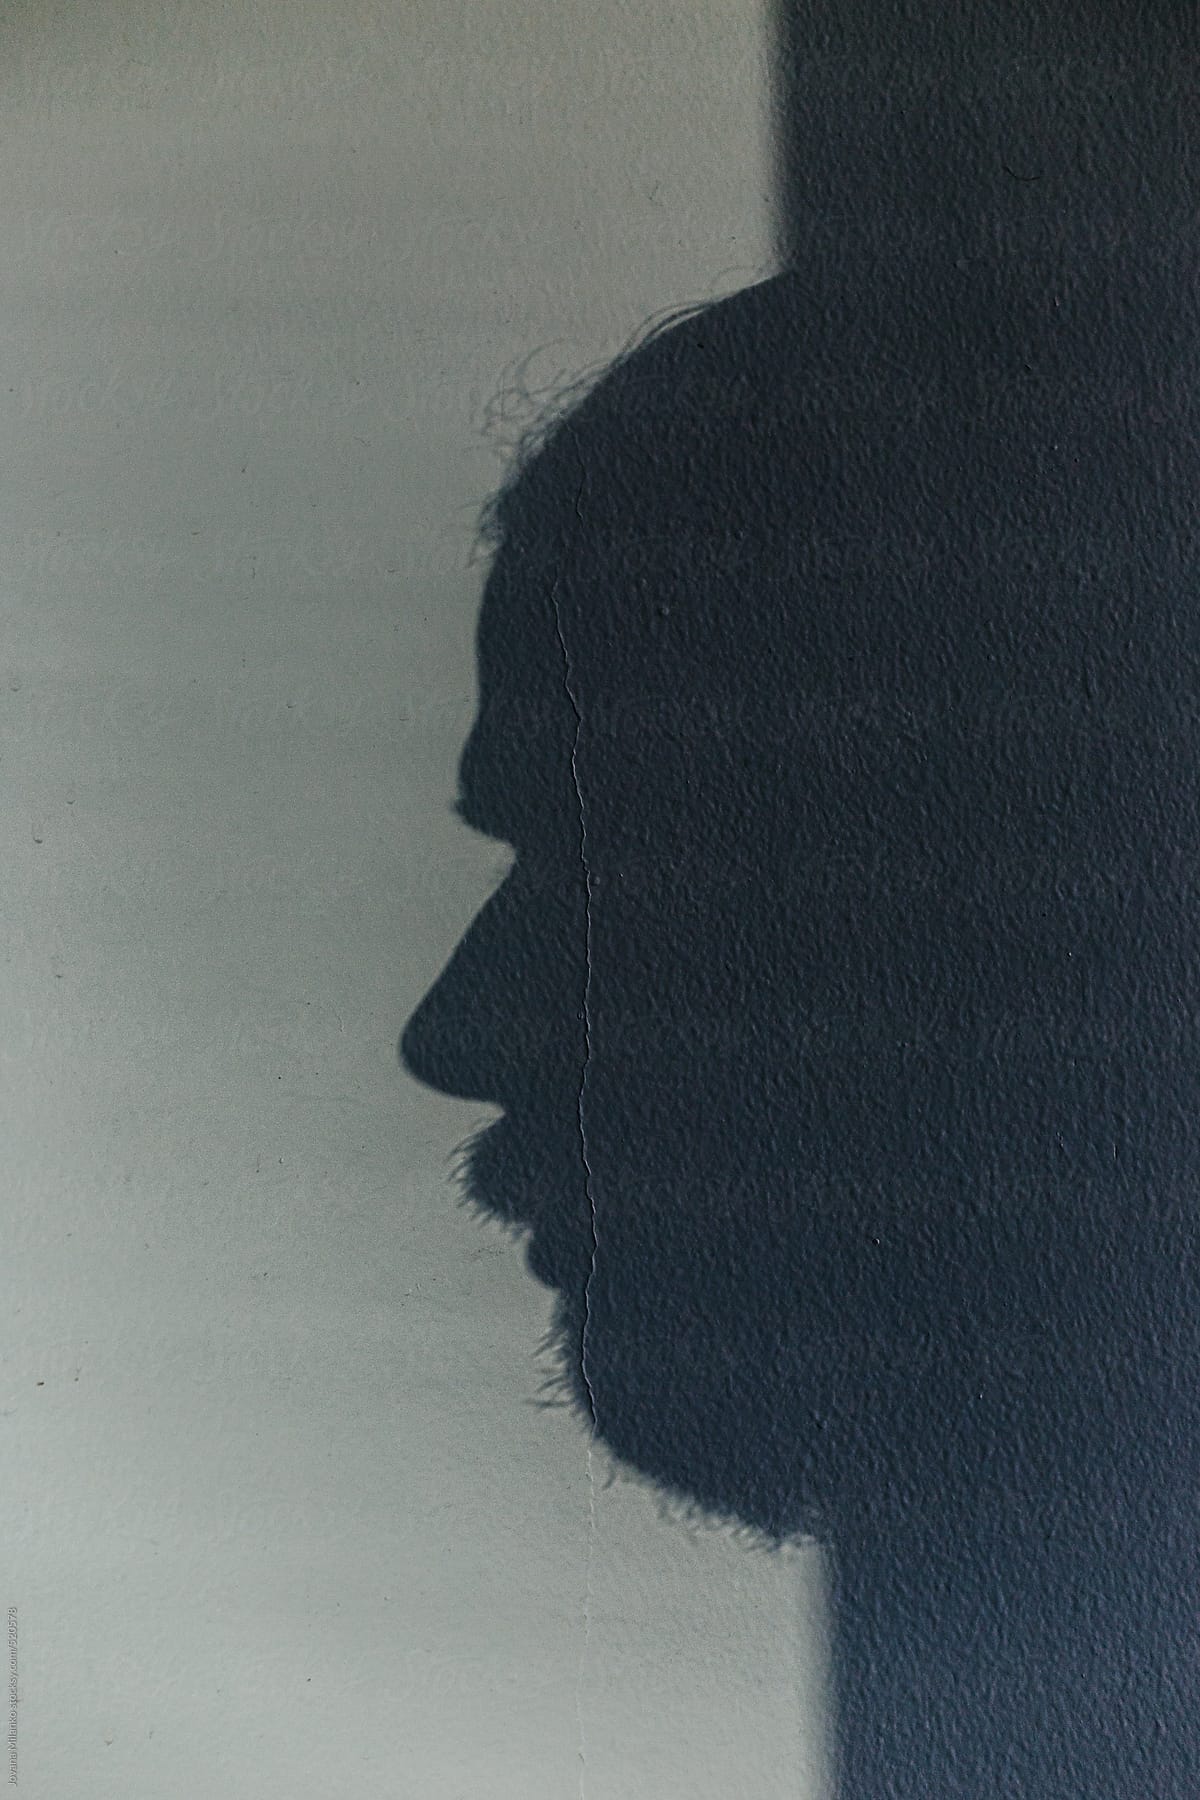 Man\'s face exiting from the shadow on the wall